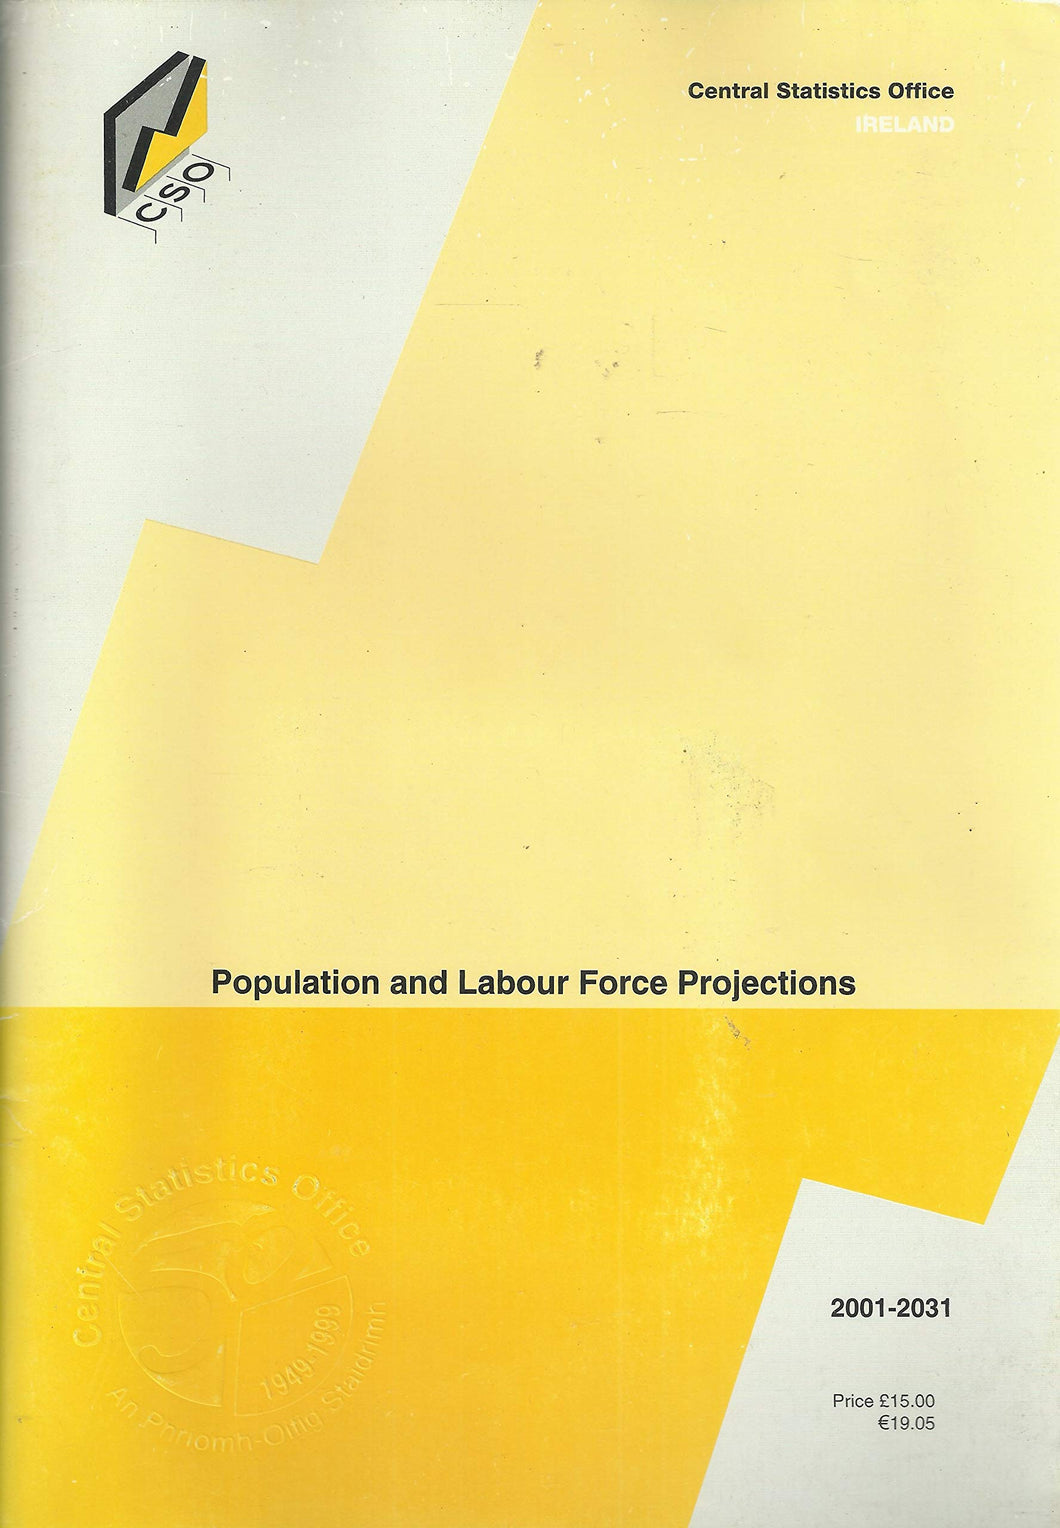 Population and Labour Force Projections 2001-2031 - Central Statistics Office Ireland